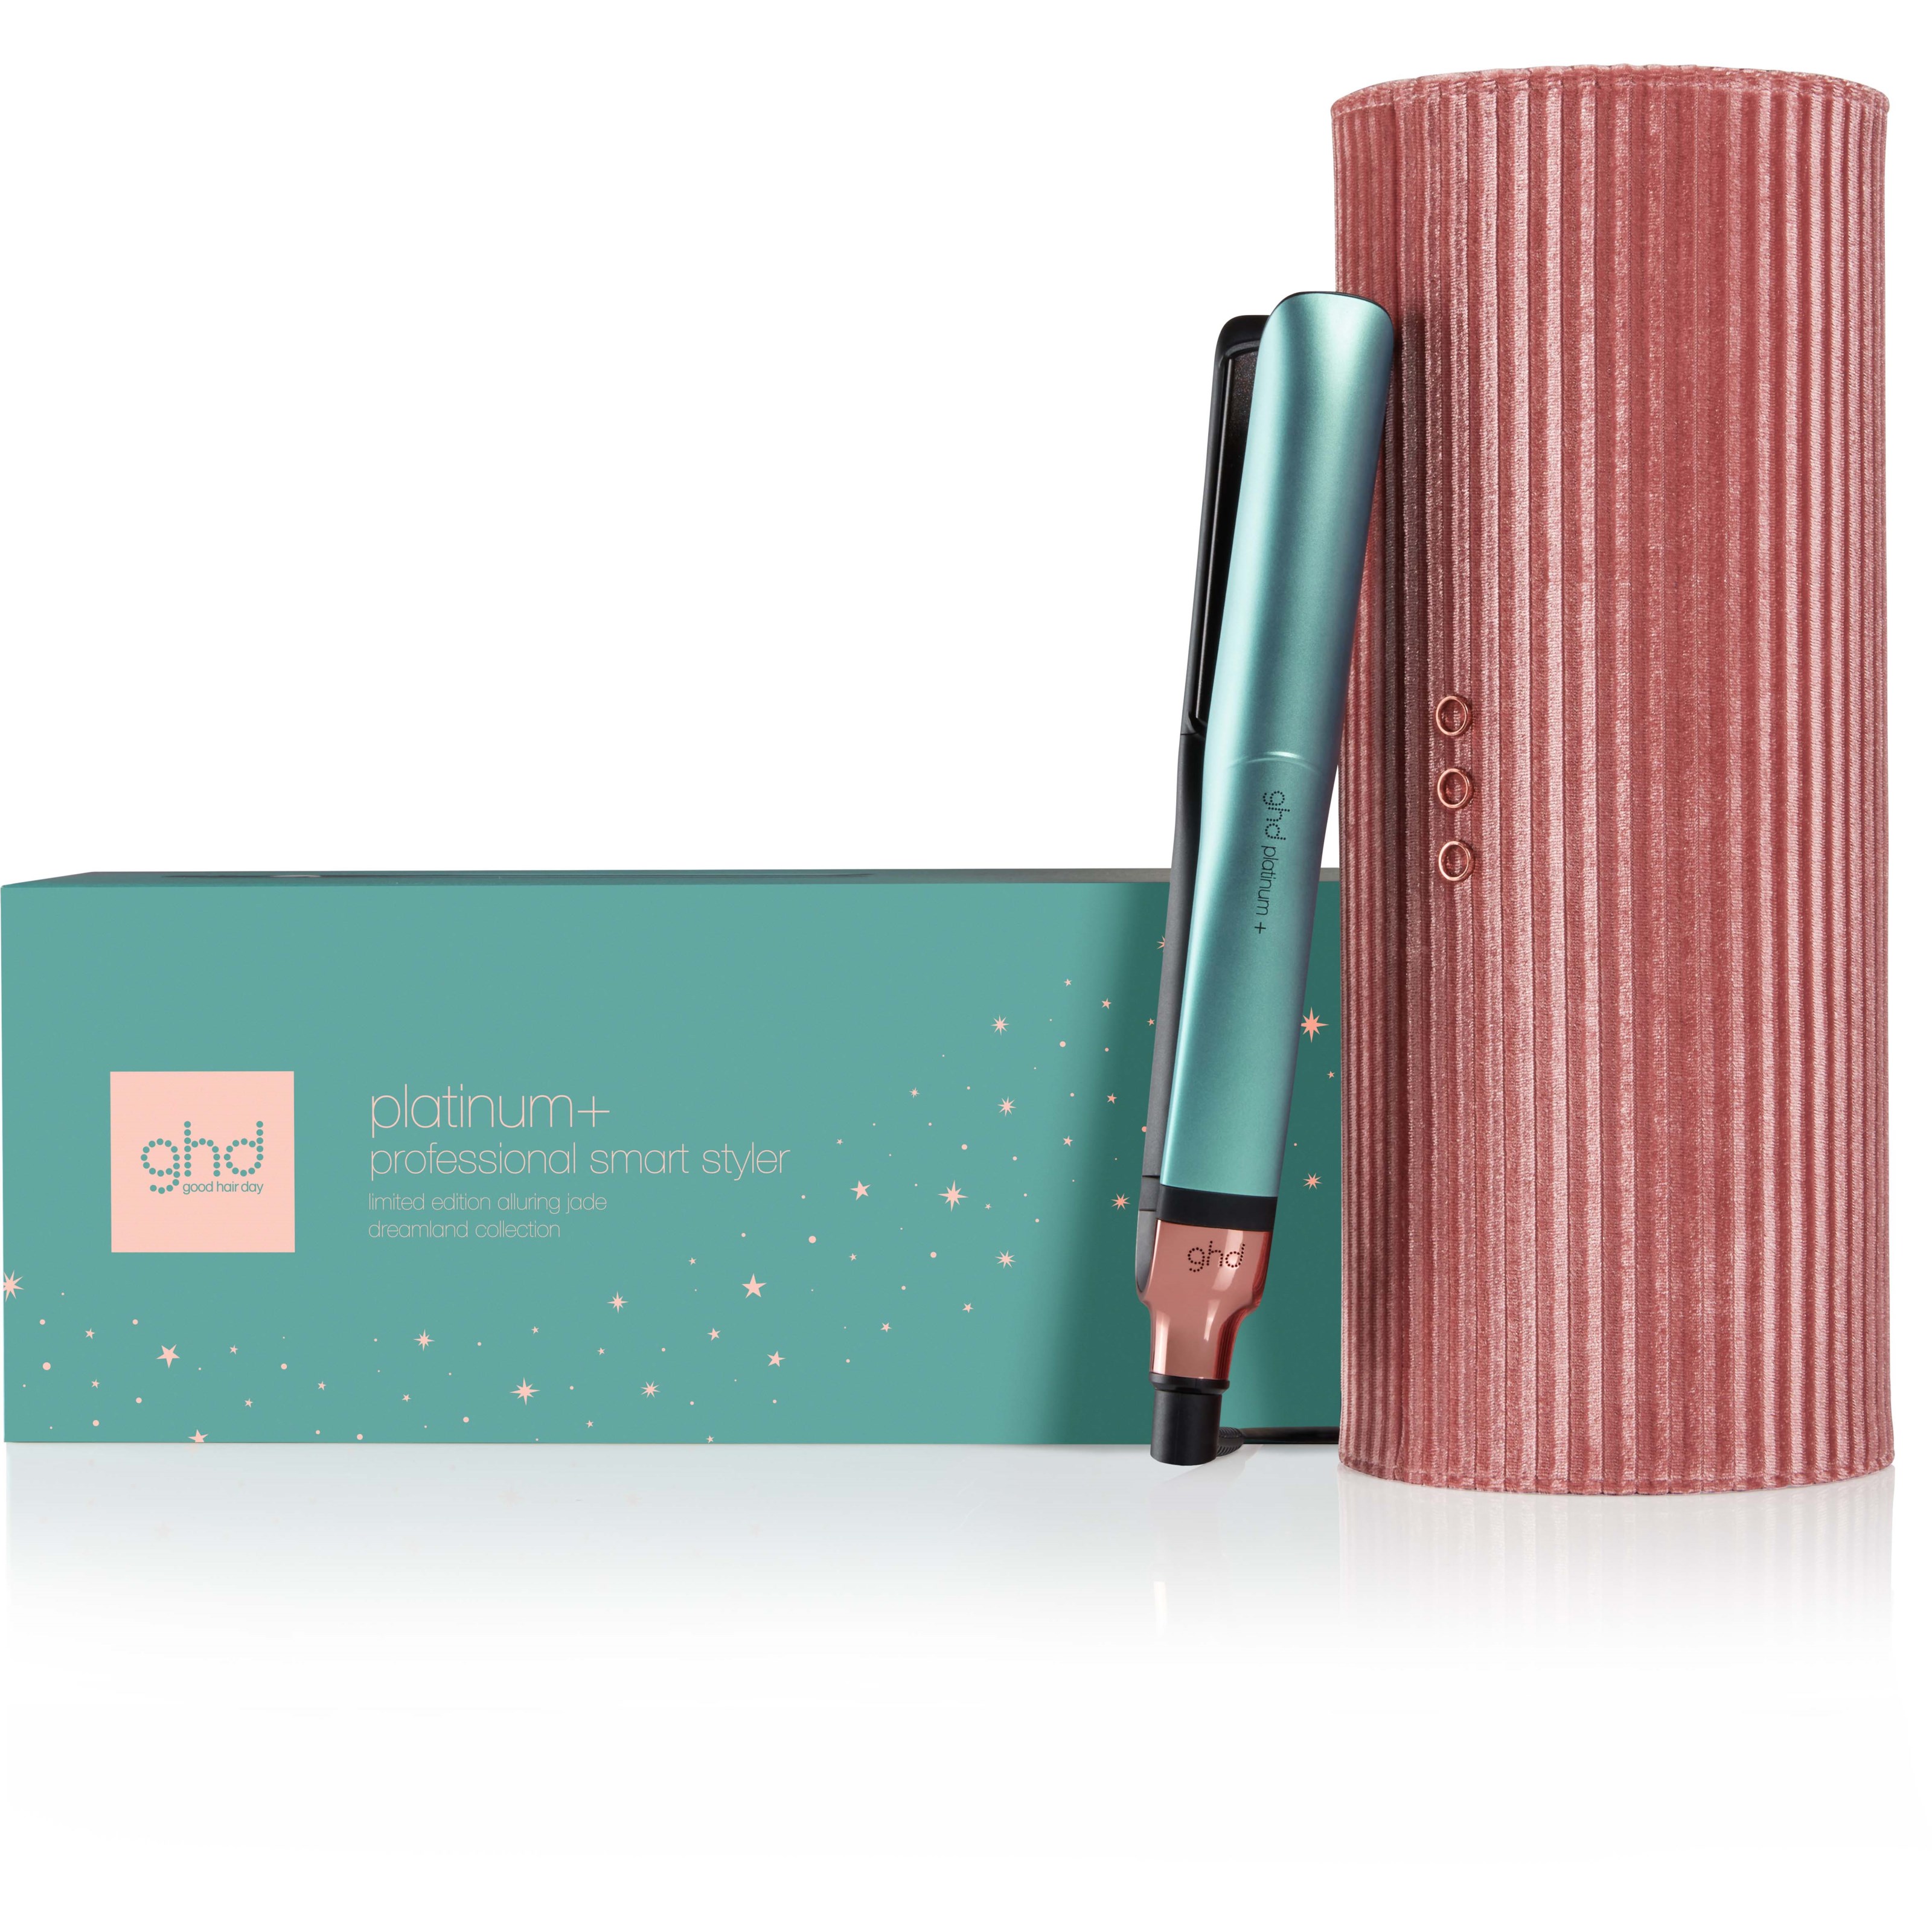 Läs mer om ghd Platinum+ Dreamland Holiday Collection Limited Edition Gift Set